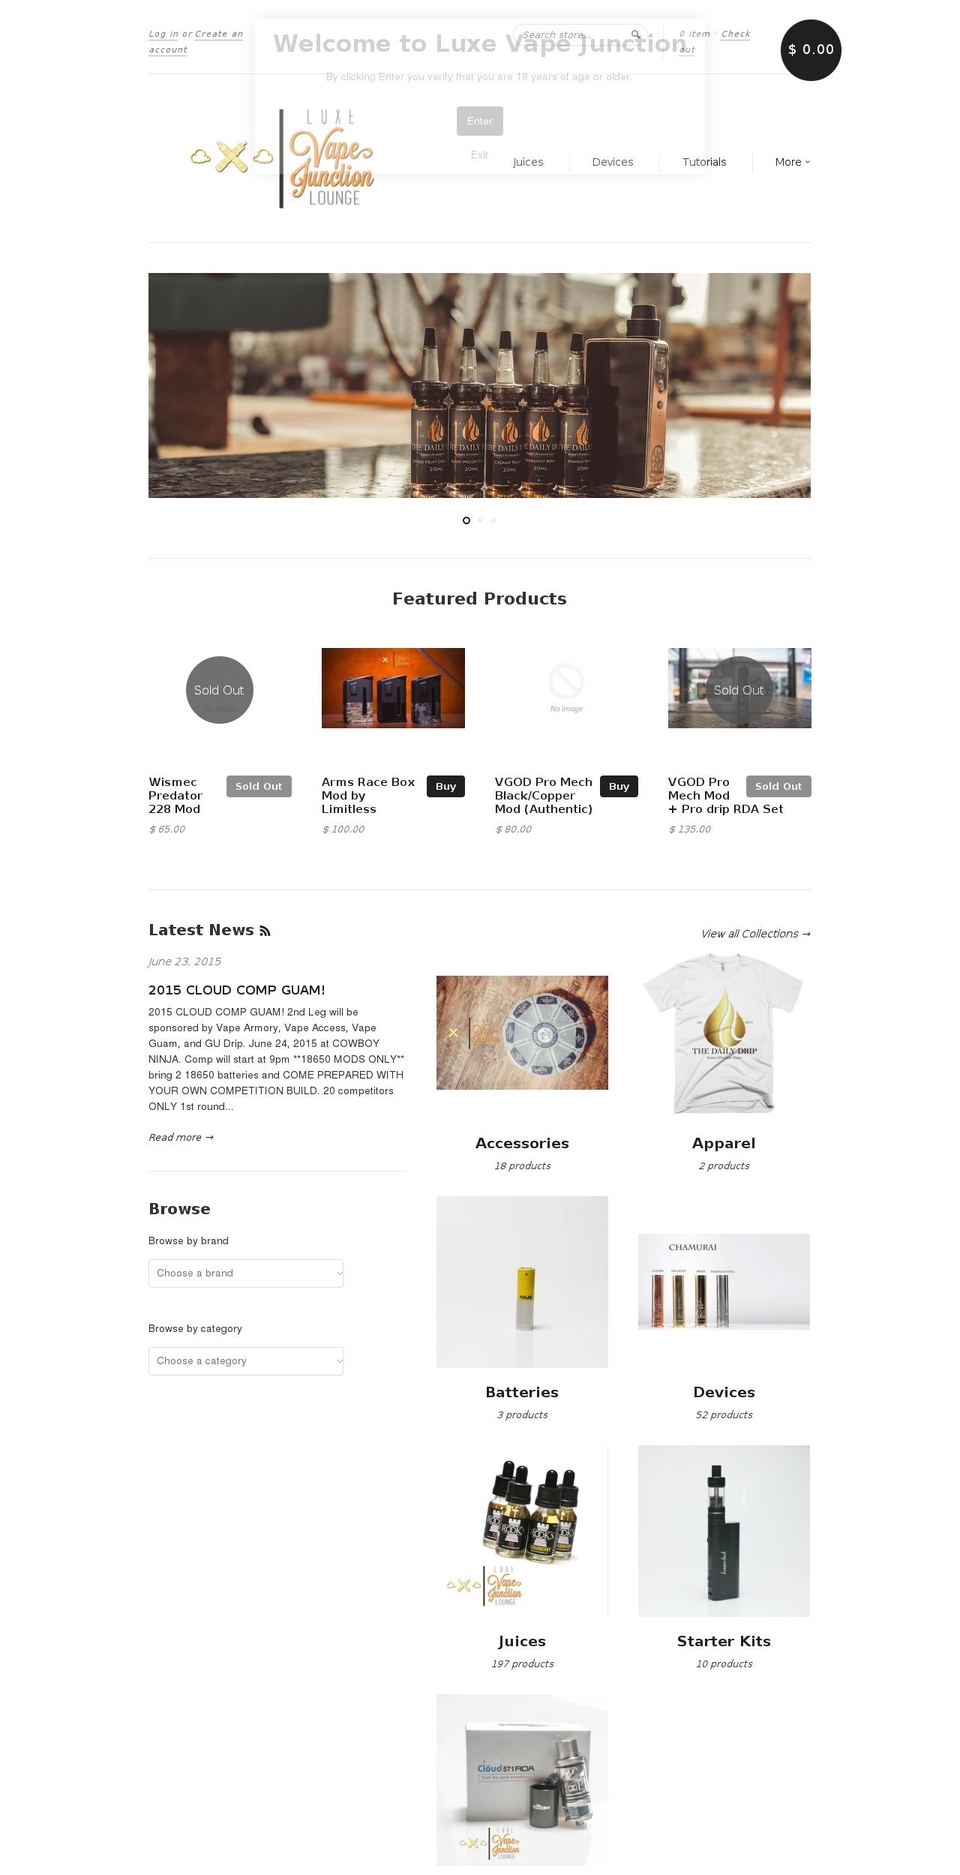 install Shopify theme site example luxevapejunction.com